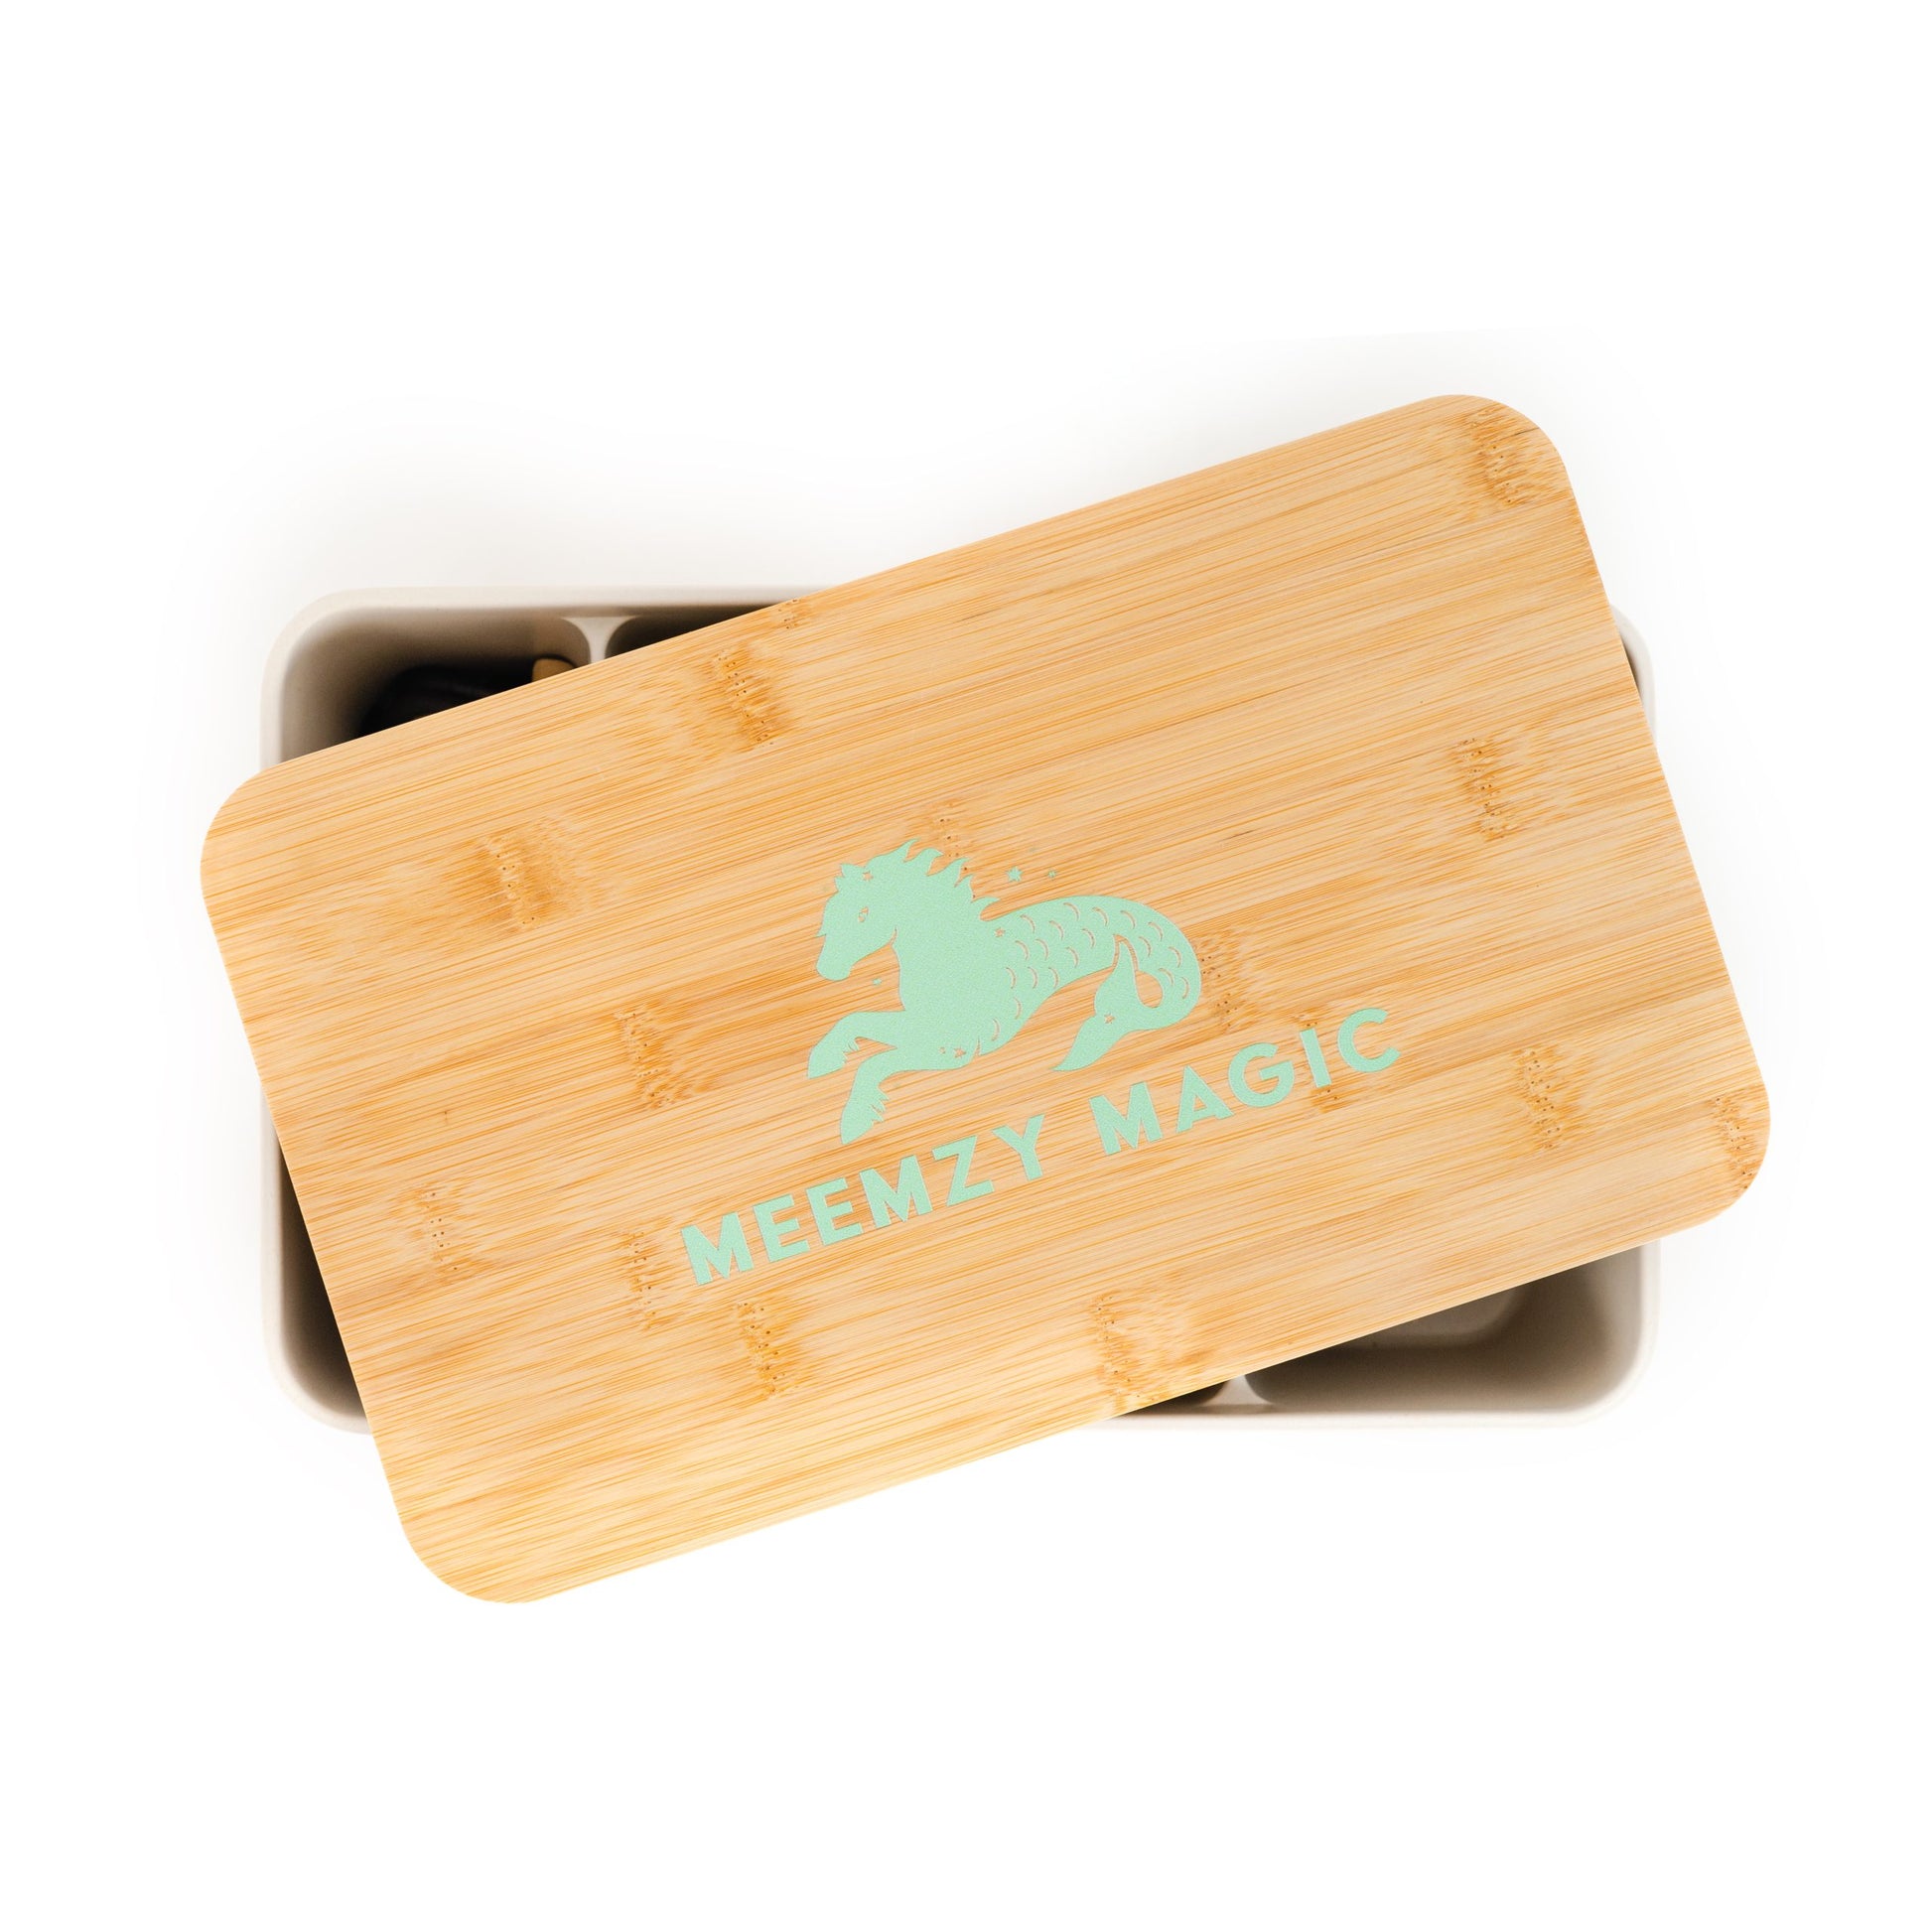 a box with the Meemzy Magic logo from above representing subscriptions